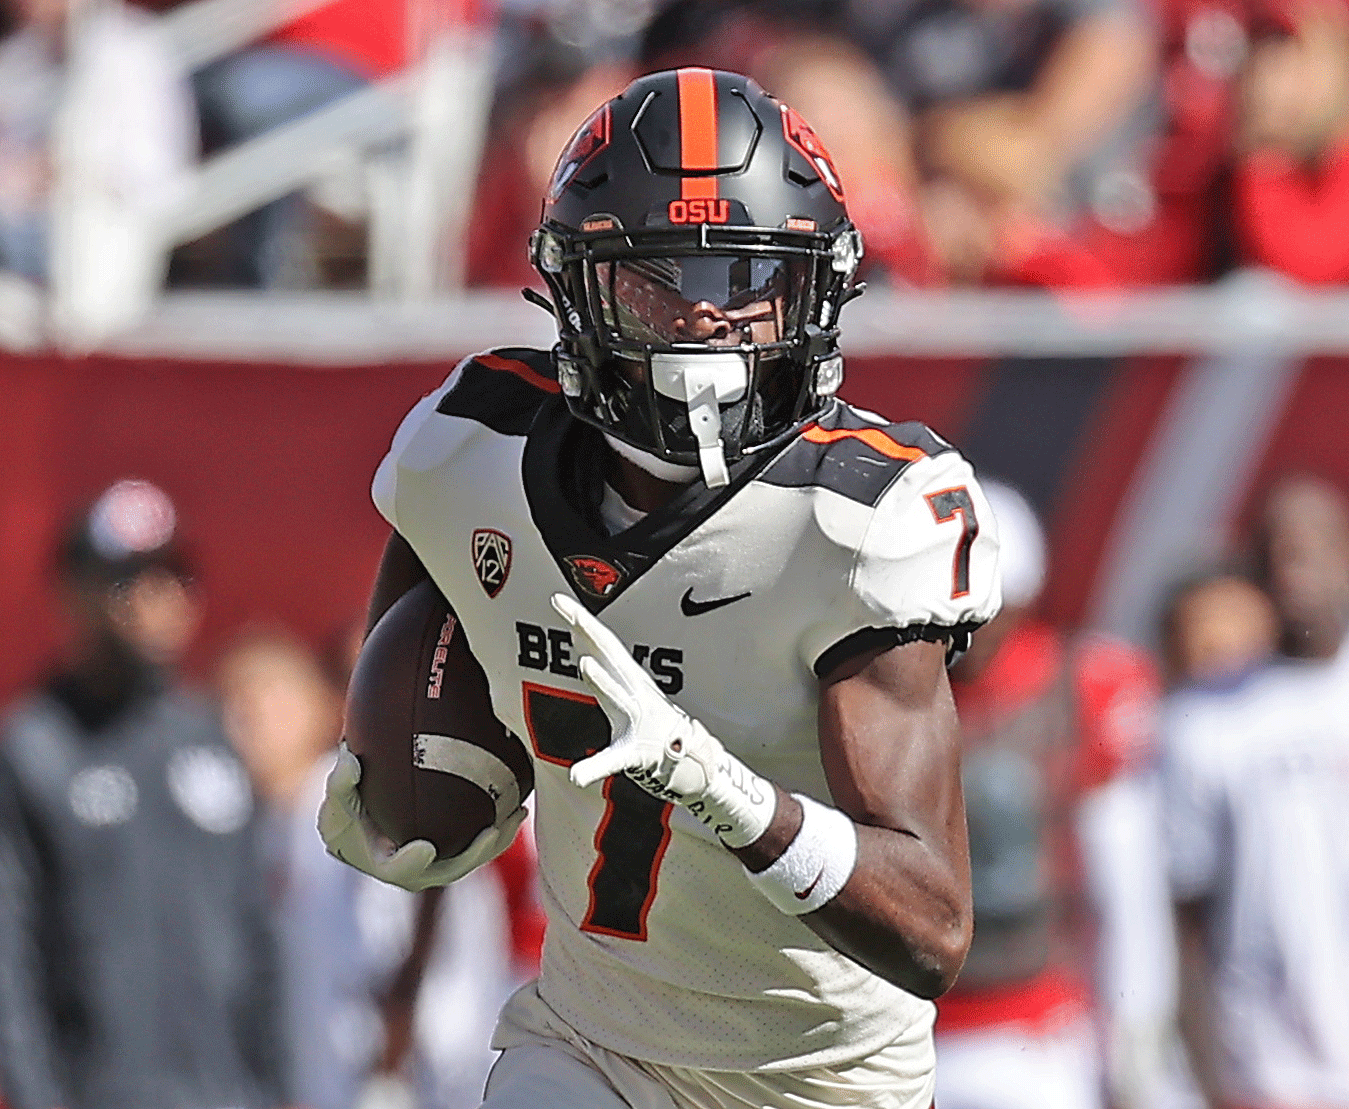 Oregon State vs Stanford Odds, Picks and Predictions: Beavers Bounce Back